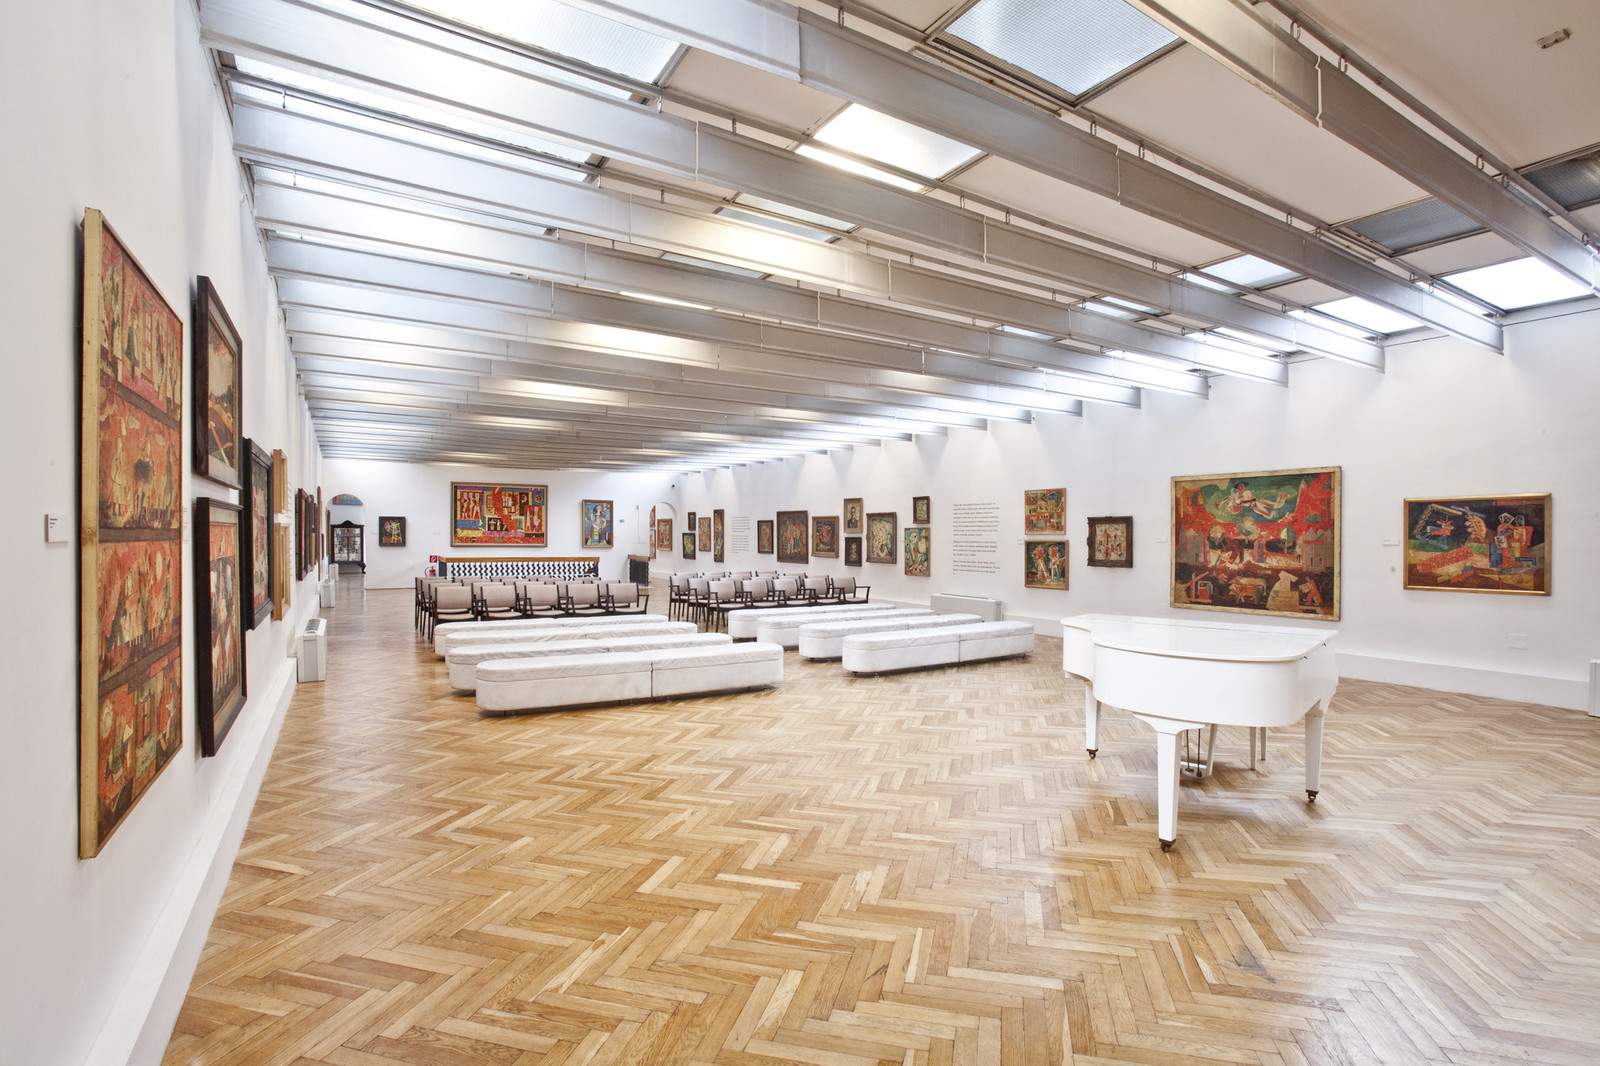 The SlovenskÃ¡ NÃ¡rodnÃ¡ GalÃ©ria: a museum on several locations to tell the story of all Slovak art